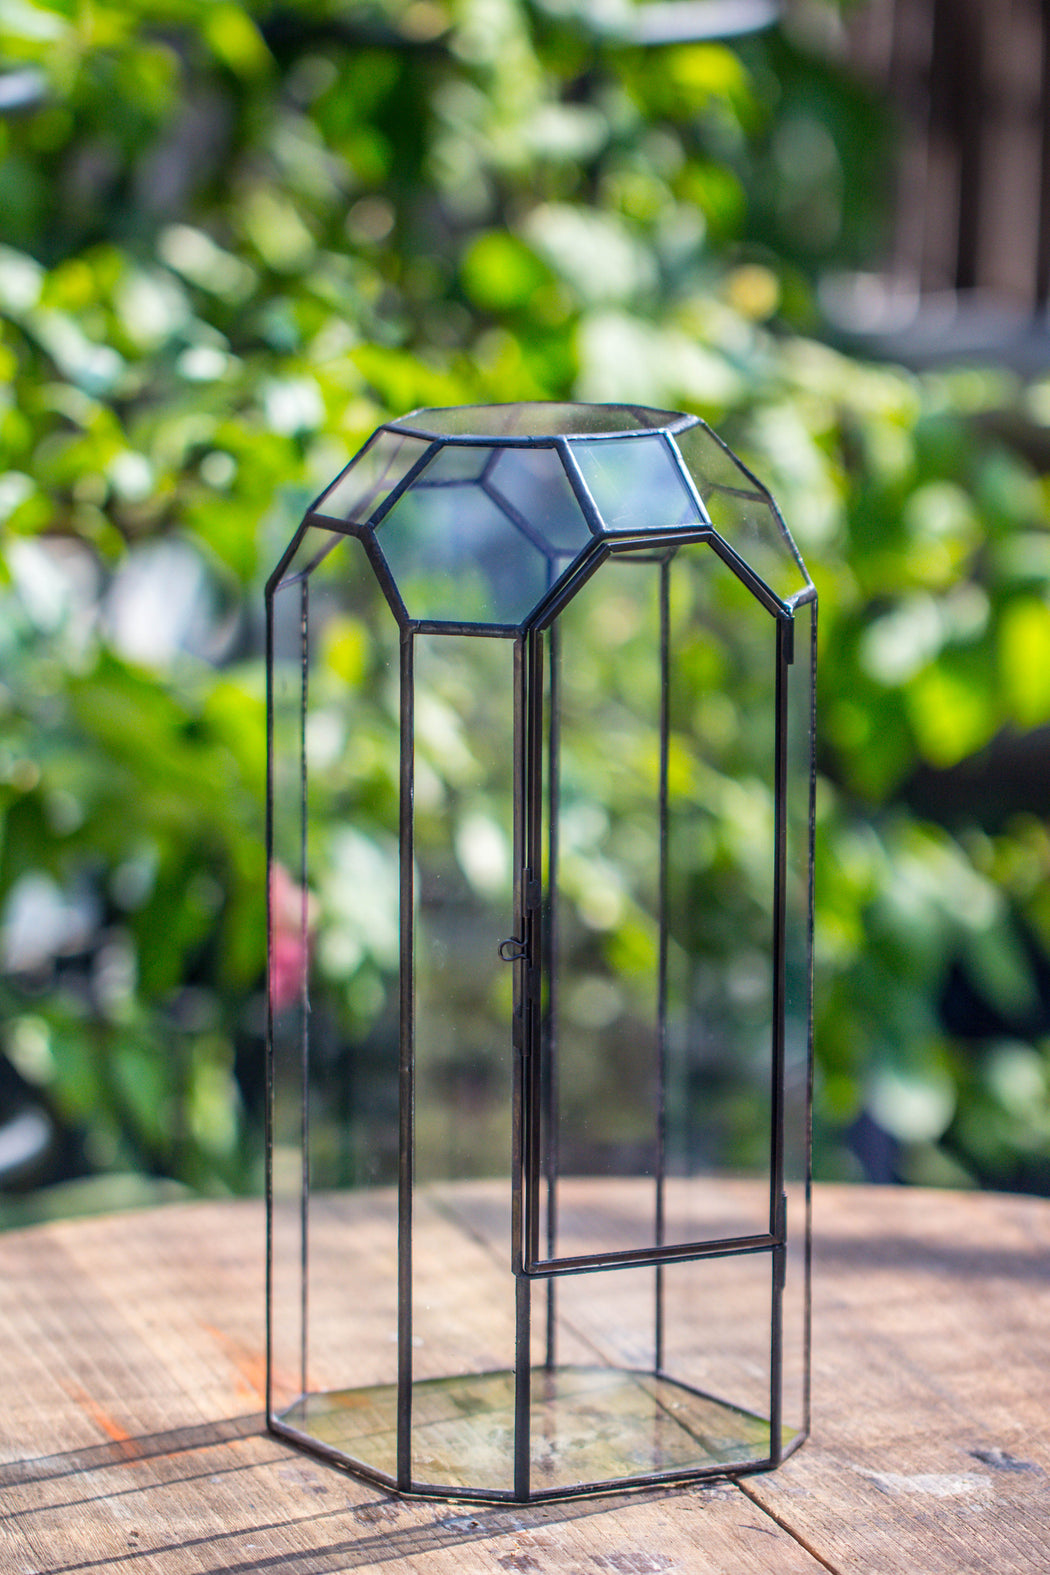 Vintage Tall Octagon Geometric Tin Glass Terrarium , 12.6" , close, suitable for tall plants, orchid, small begonia Pitcher, Micro landscape    -with warm light set - NCYPgarden